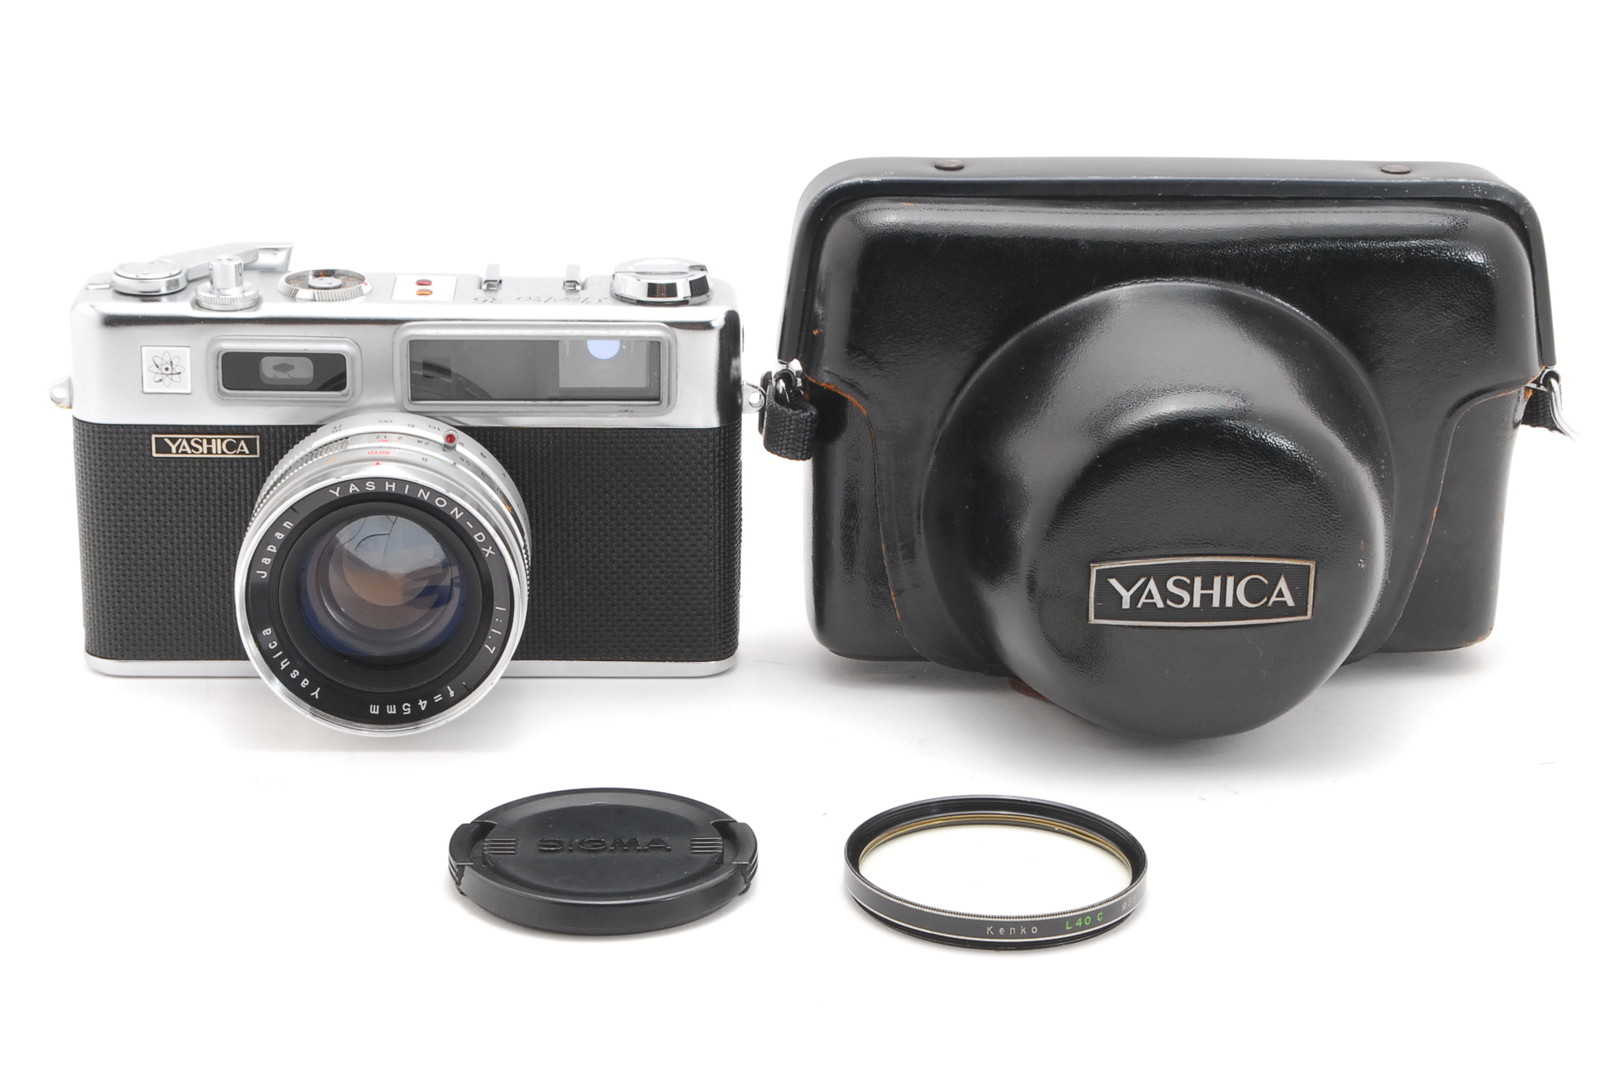 PROMOTION. NEAR MINT YASHICA Electro 35 Range Finder YASHINON-DX 45mm f/1.7, Lens Filter, Front Cap, Case from Japan